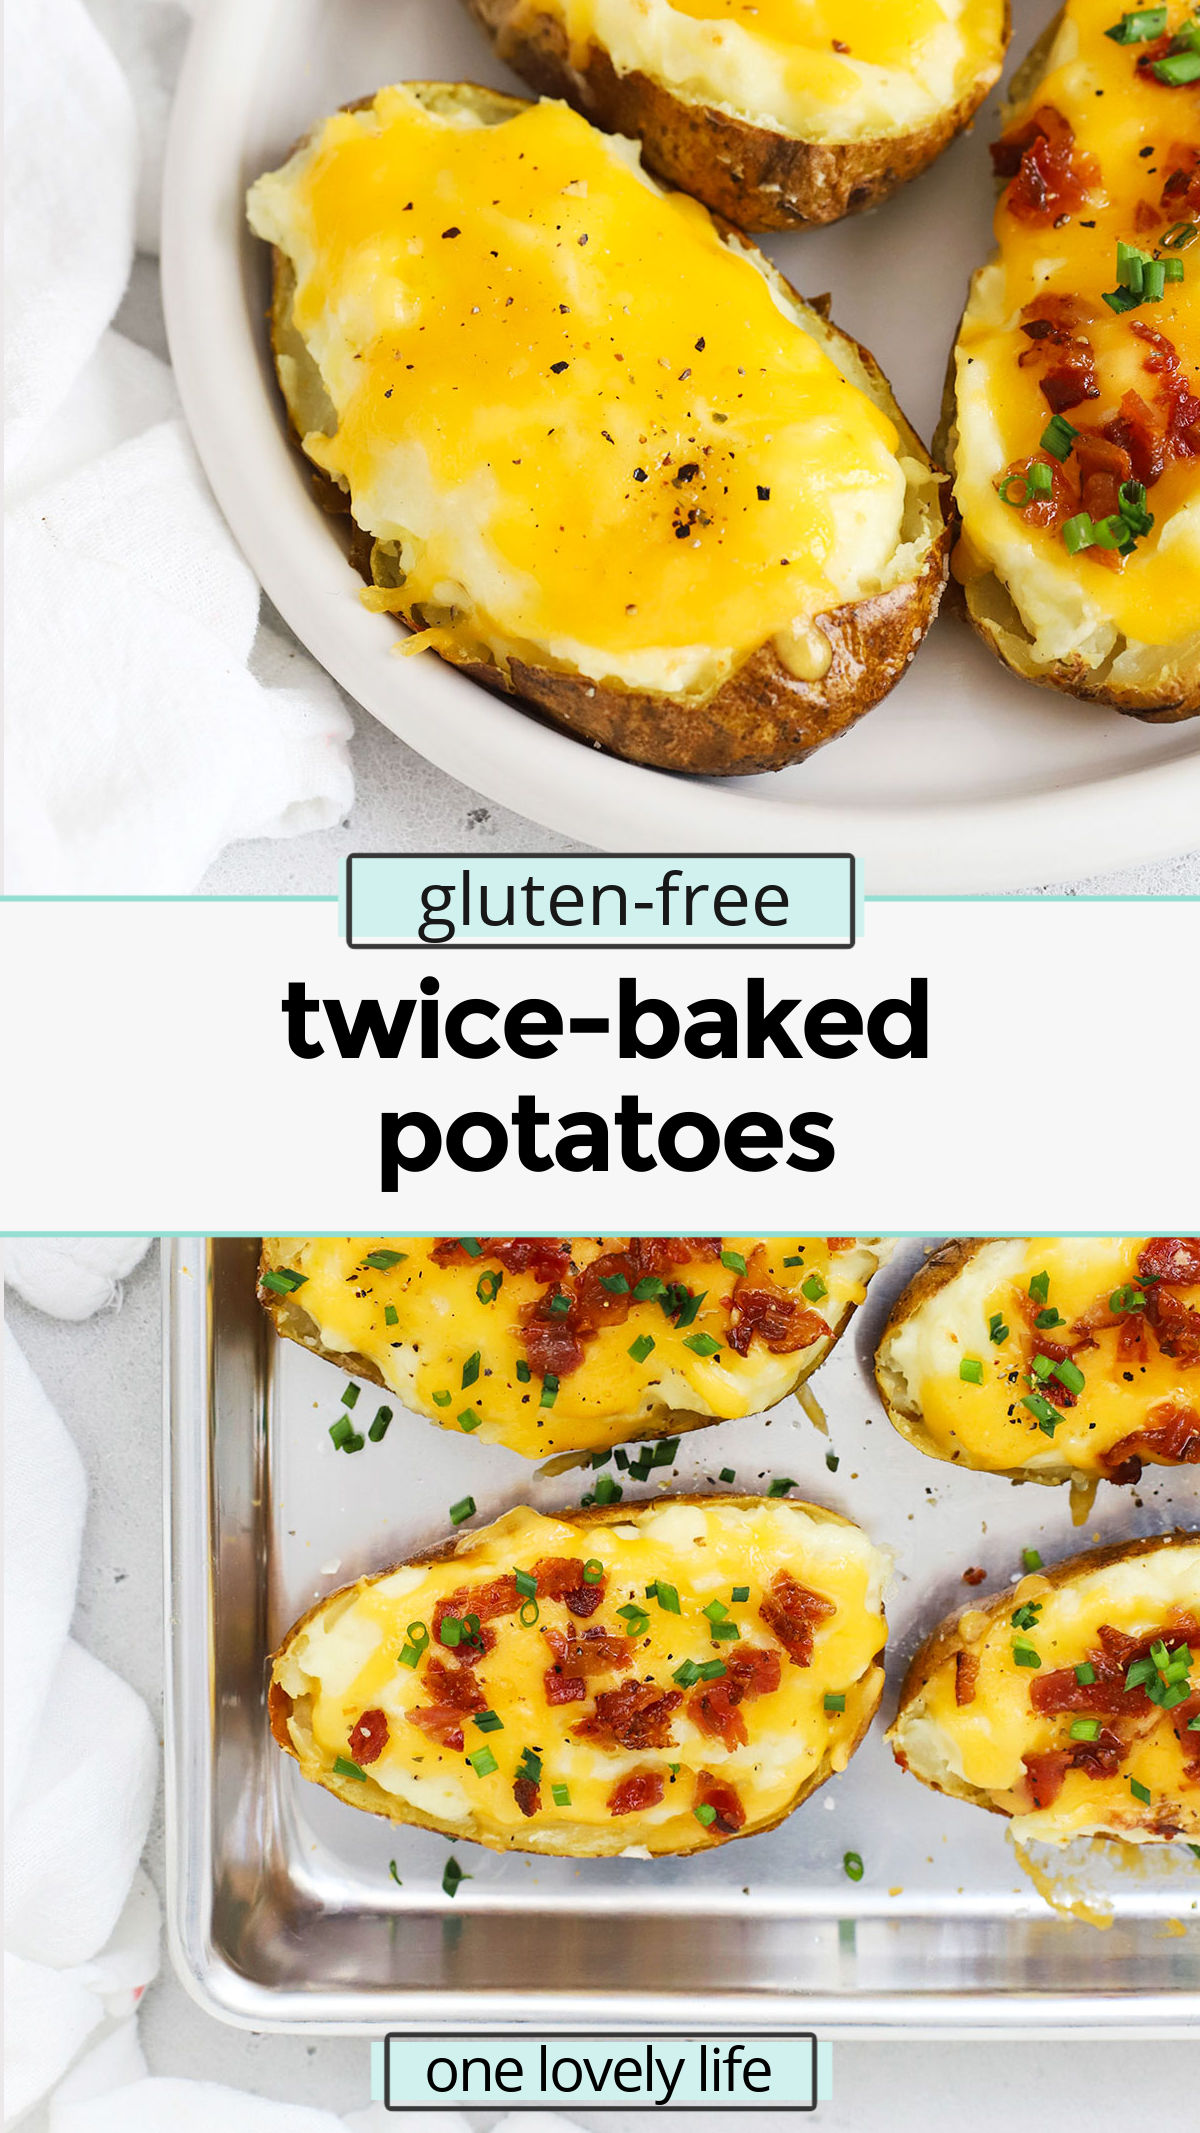 Our Twice Baked Potatoes recipe is a popular side dish that's delicious with all sorts of dinners. Don't miss all our favorite add-ins and toppings to try! / easy twice-baked potatoes recipe / gluten-free twice baked potatoes recipe / twice baked potatoes with cheese / twice baked potatoes with bacon / the best twice baked potatoes recipe / easter side dish / easter potatoes / thanksgiving side dish / thanksgiving potatoes /